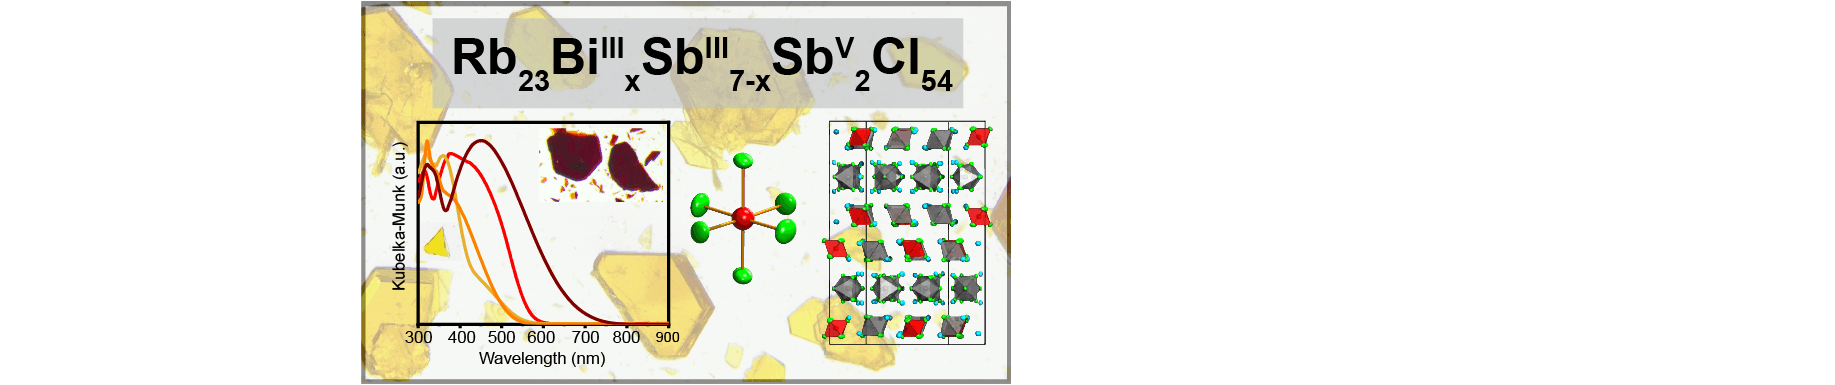 Lone-​Pair-Induced Structural Ordering in the Mixed-​Valent 0D Metal-​Halides Rb23BiIIIxSbIII7–xSbV2Cl54 (0 ≤ x ≤ 7)